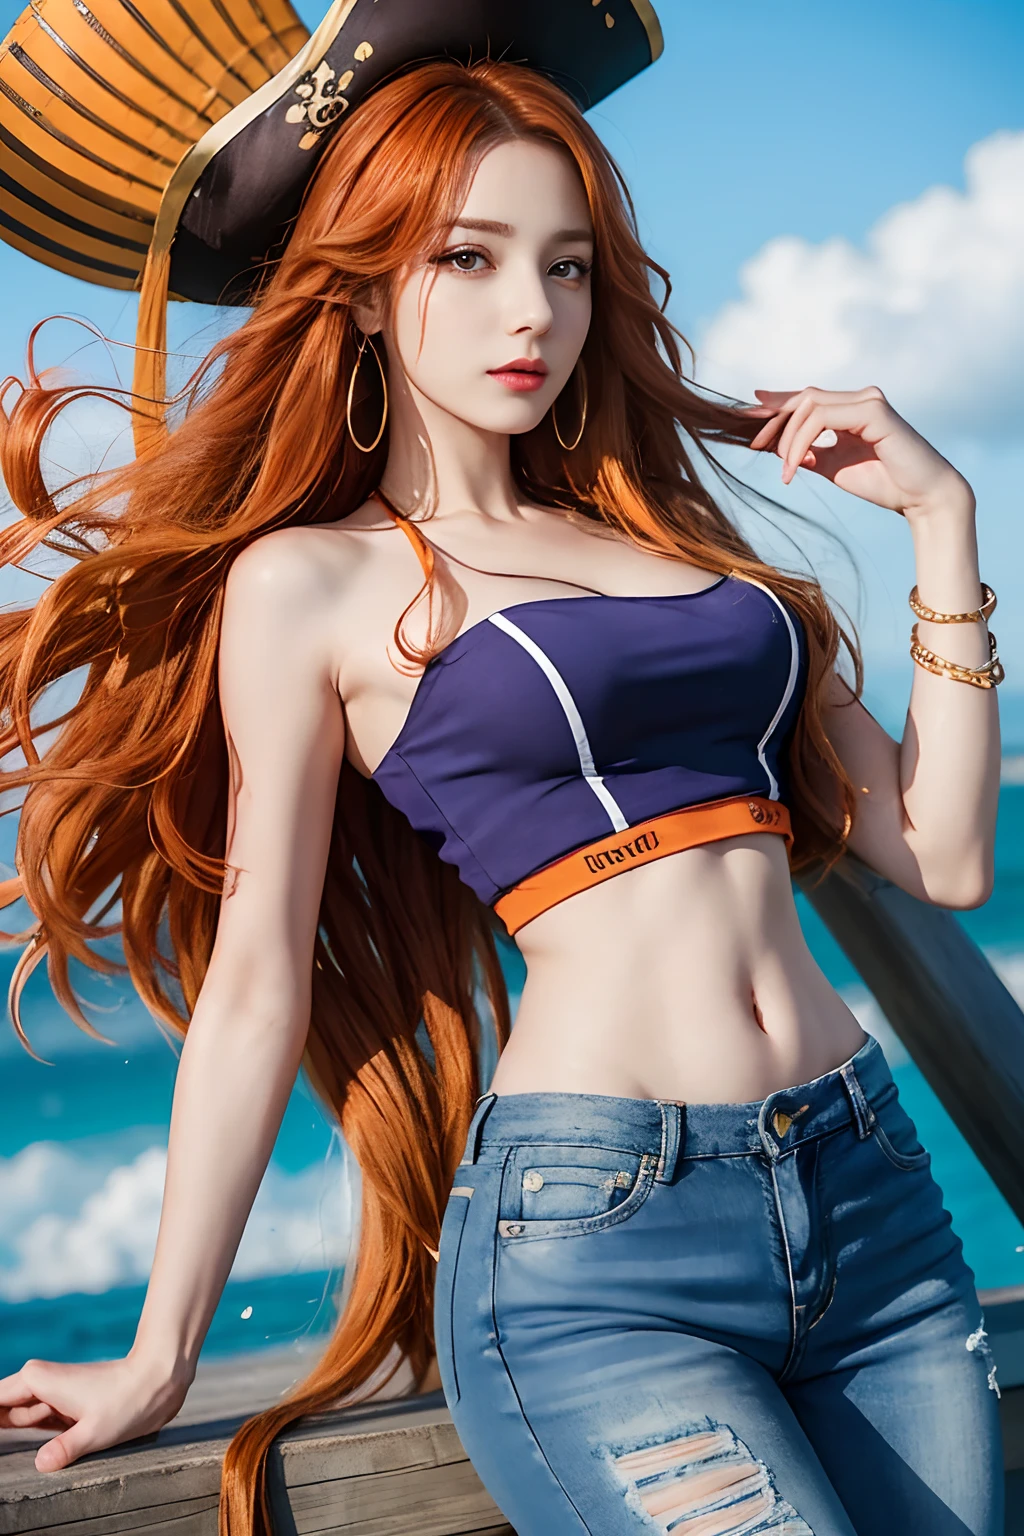 (((masterpiece+best quality+high resolution+ultra-detailed))), nami \(one piece\), long silky orange hair, high nose, sharp eyes, noble and inviolable temperament, (([female]: 1.2 + [beauty]: 1.2 + orange long hair: 1.2)), pirate ship background, (one piece), blue sky, bracelets, bubbles, clouds, denim, pants, shoulder tatto, bright eyes, dynamic angle and posture.